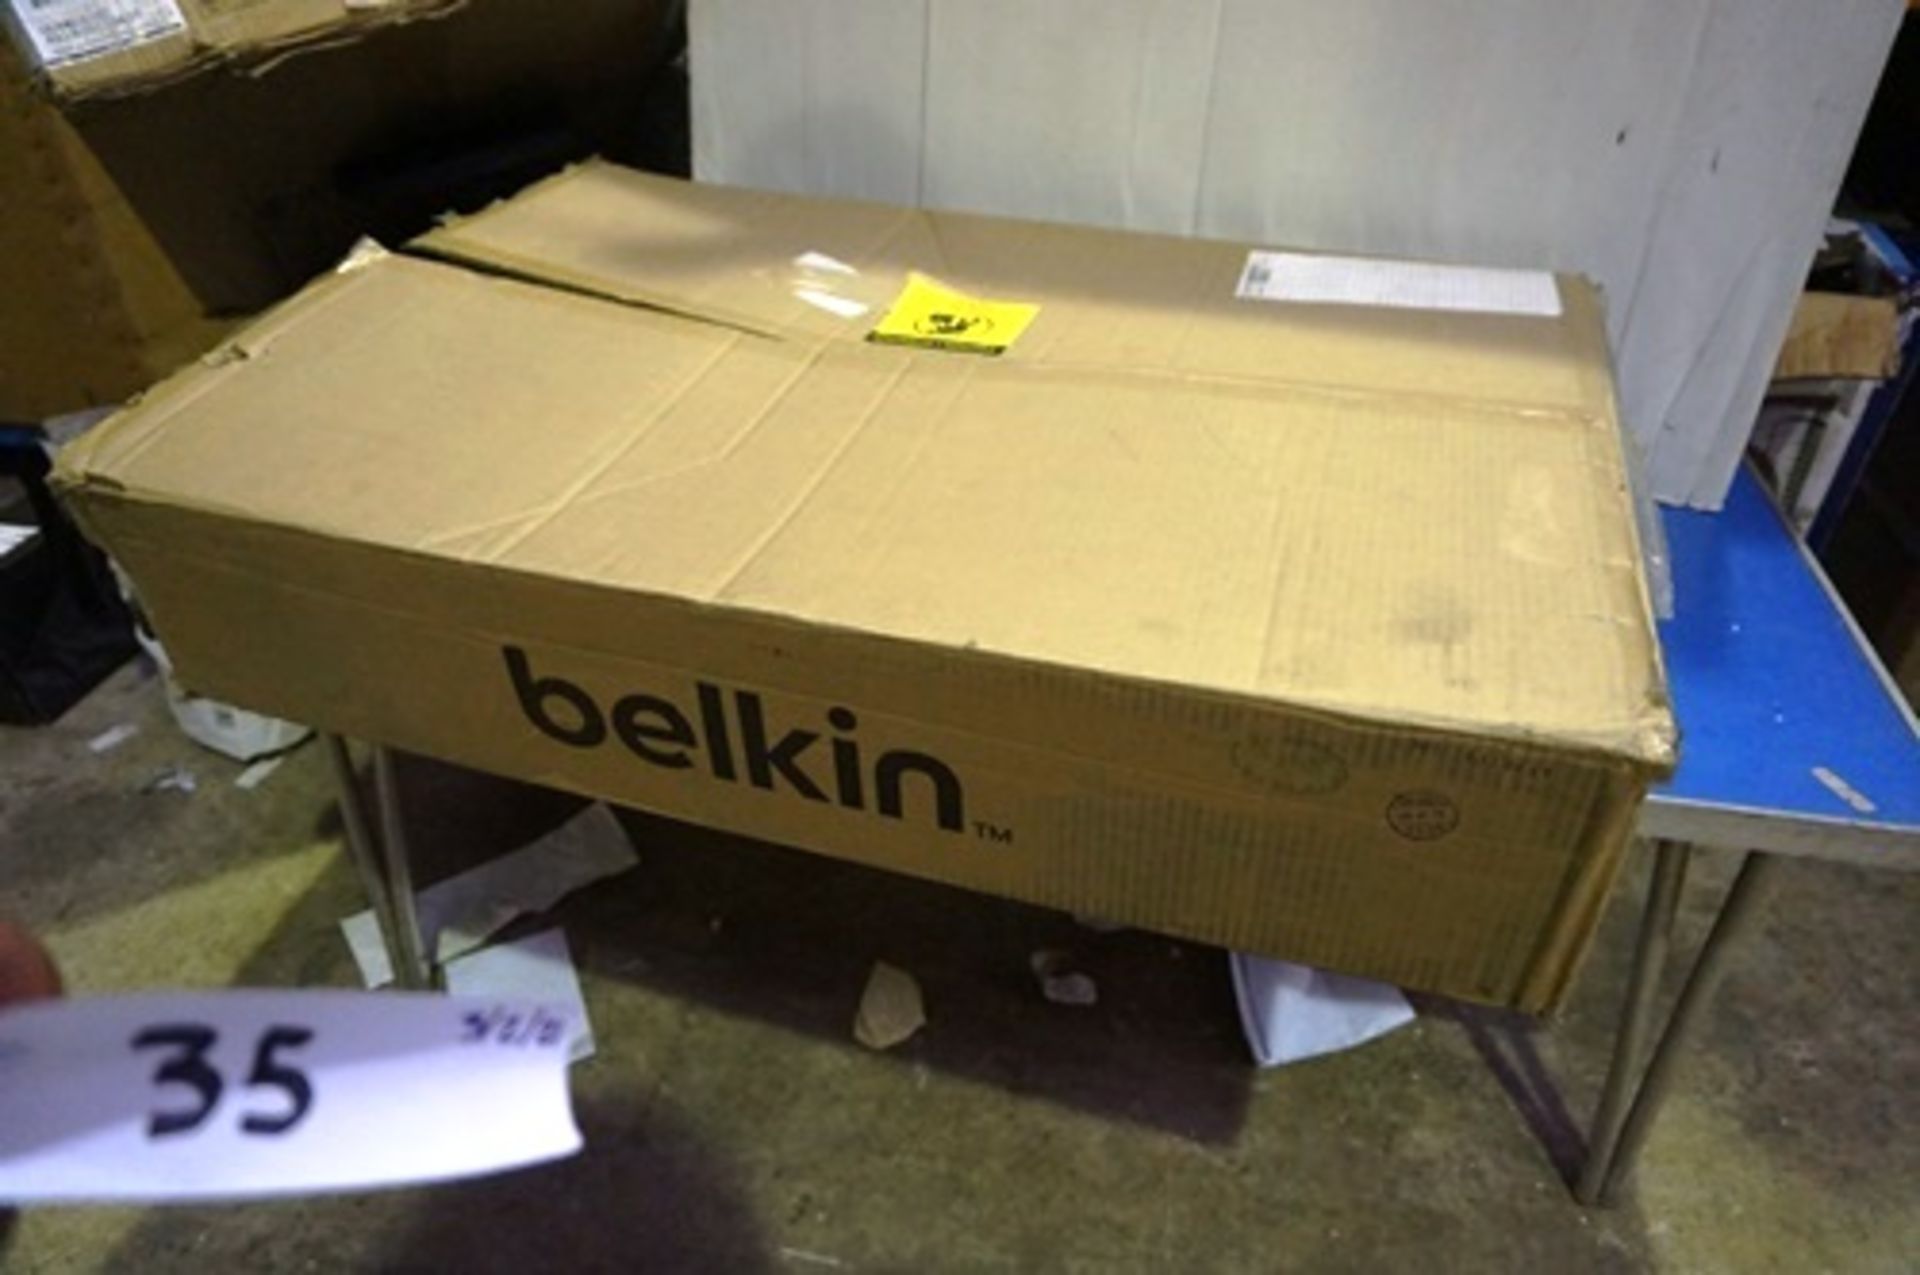 A Belkin 18.5" rack mounted computer with LCD screen, model F1DC101Vea - New in box, box open.